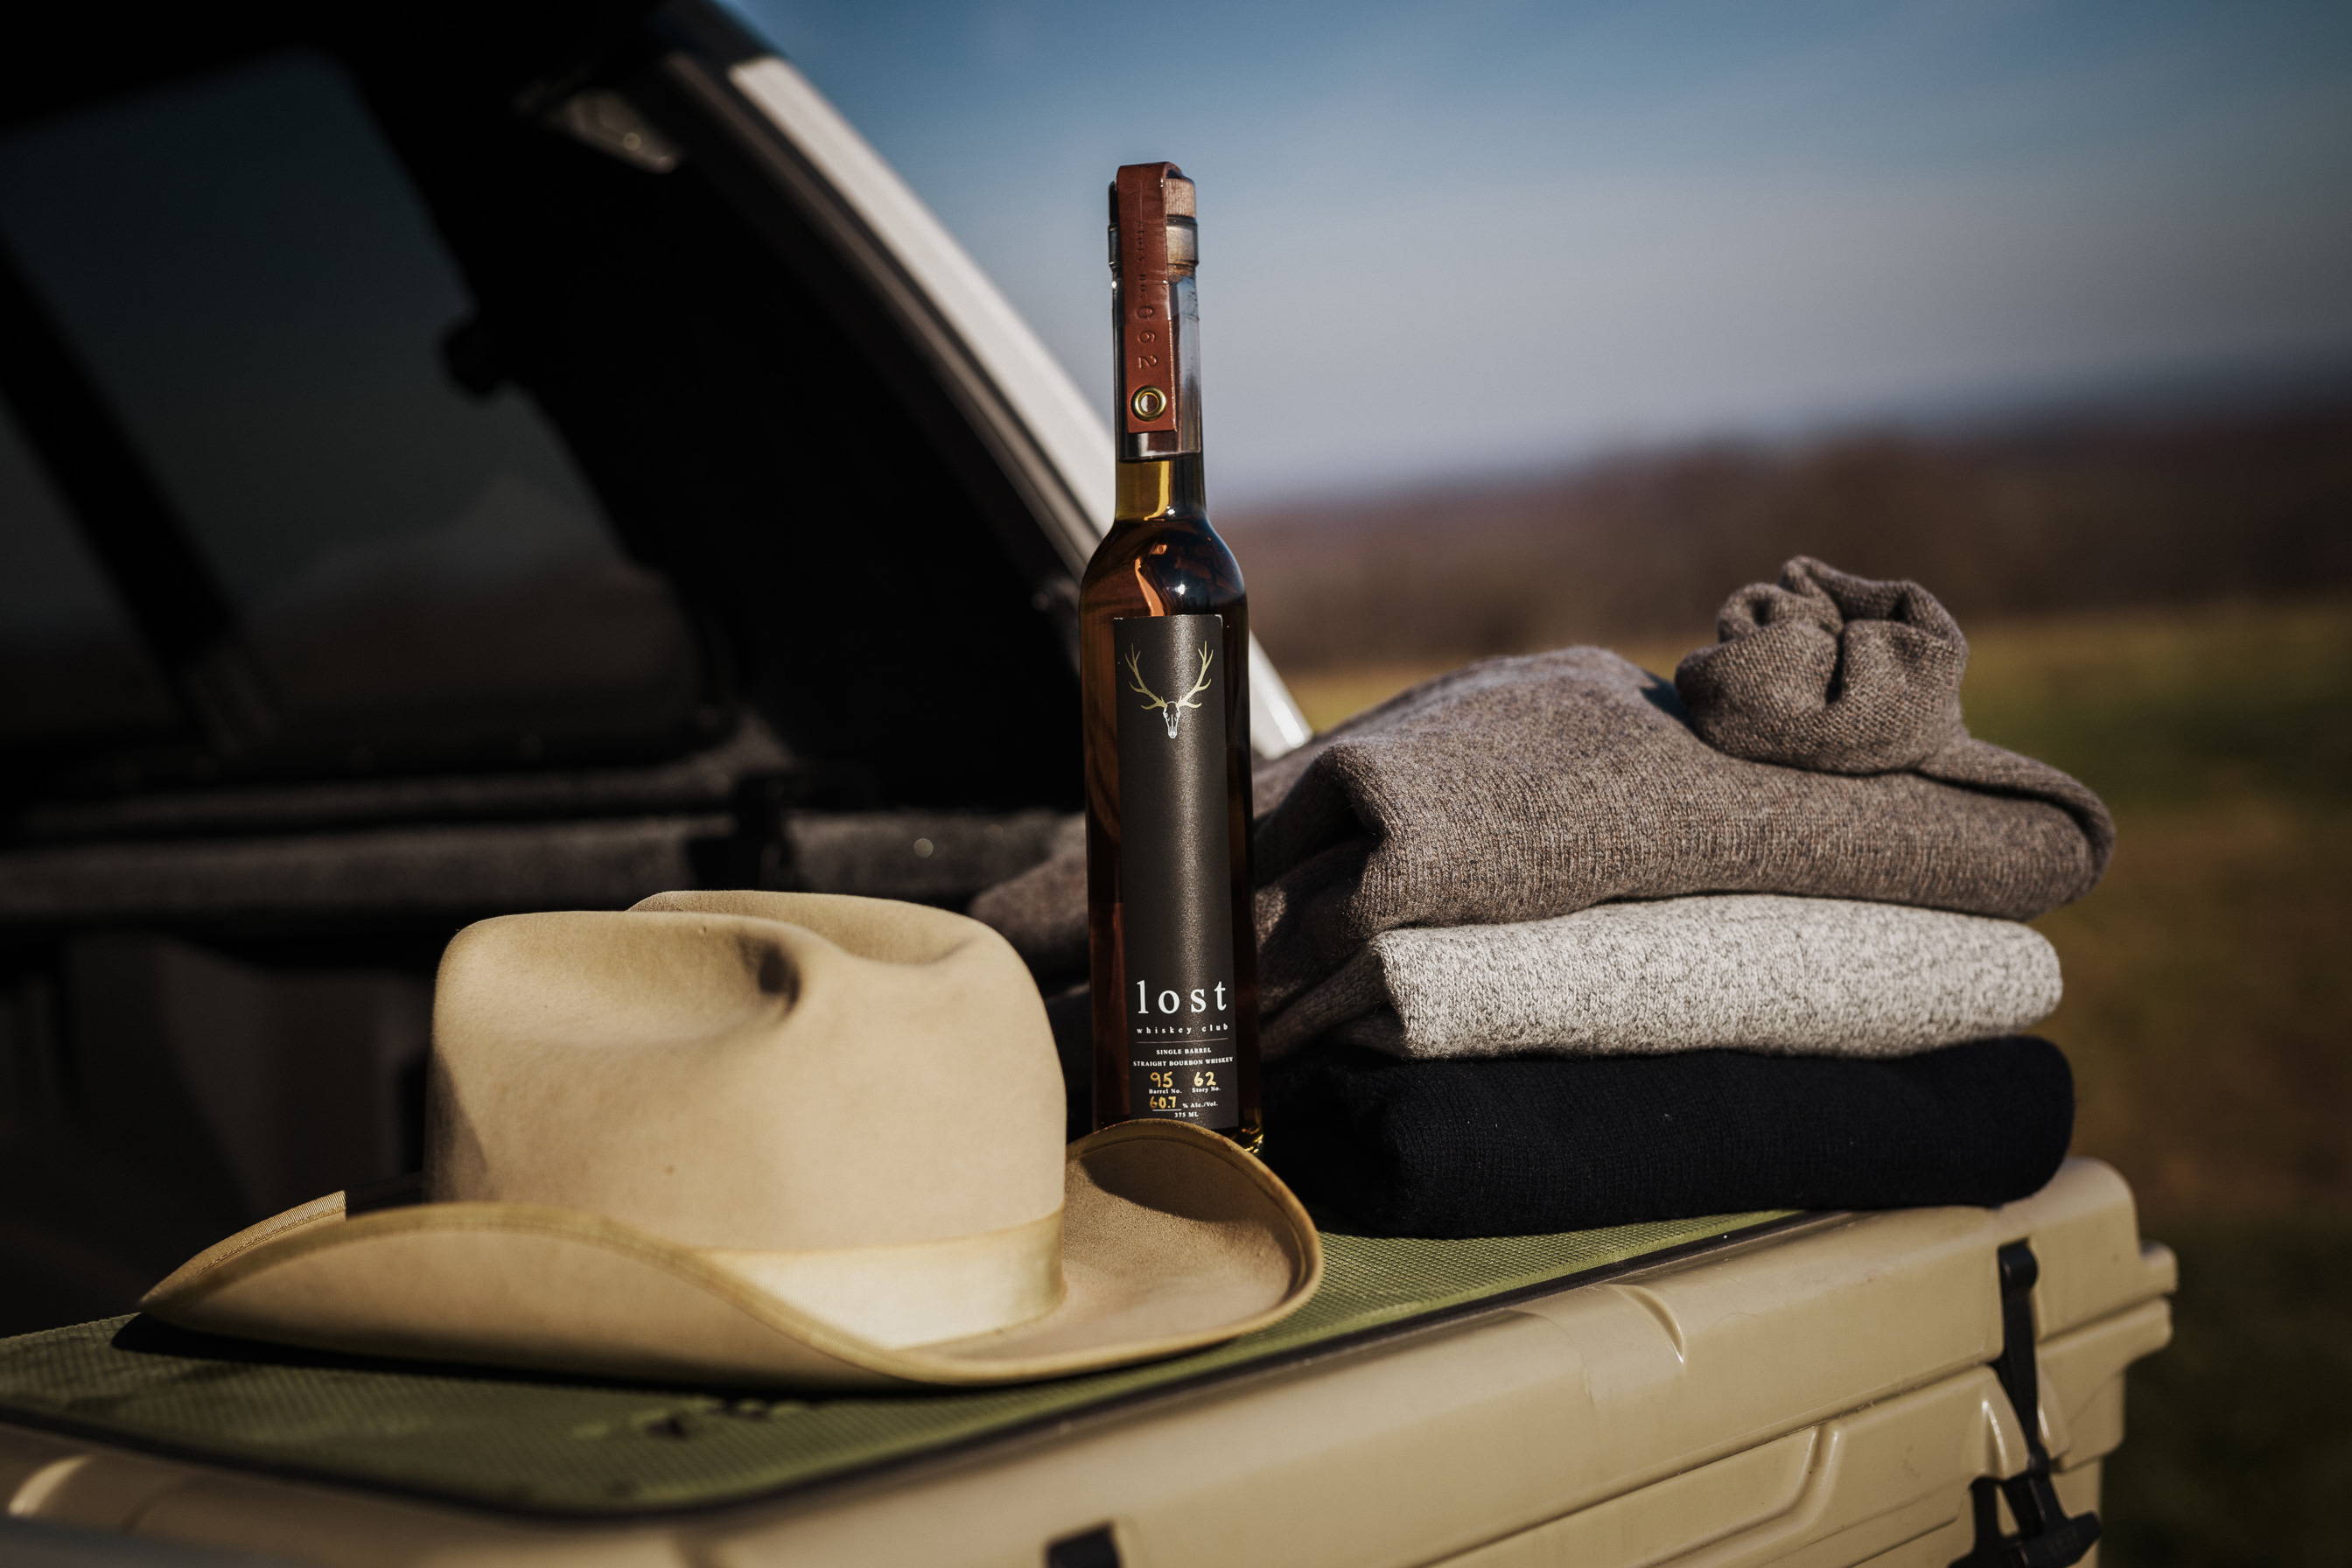 A detail shot of a tan hat, a Lost Whiskey bottle, and three Ledbury sweaters on top of a Yeti cooler.